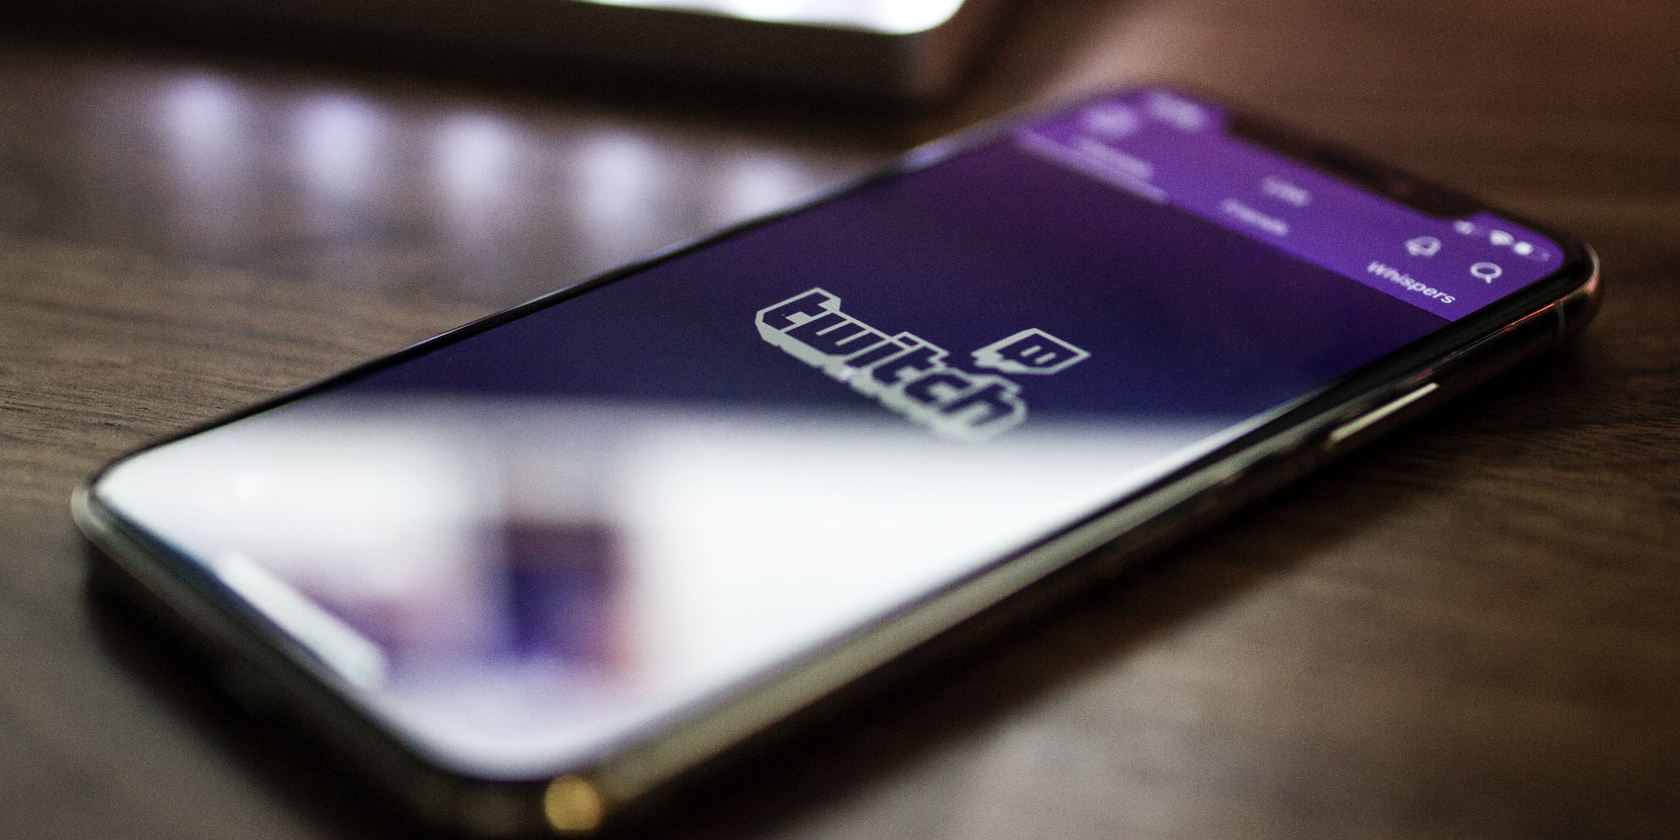 The Twitch app loading up on a mobile device